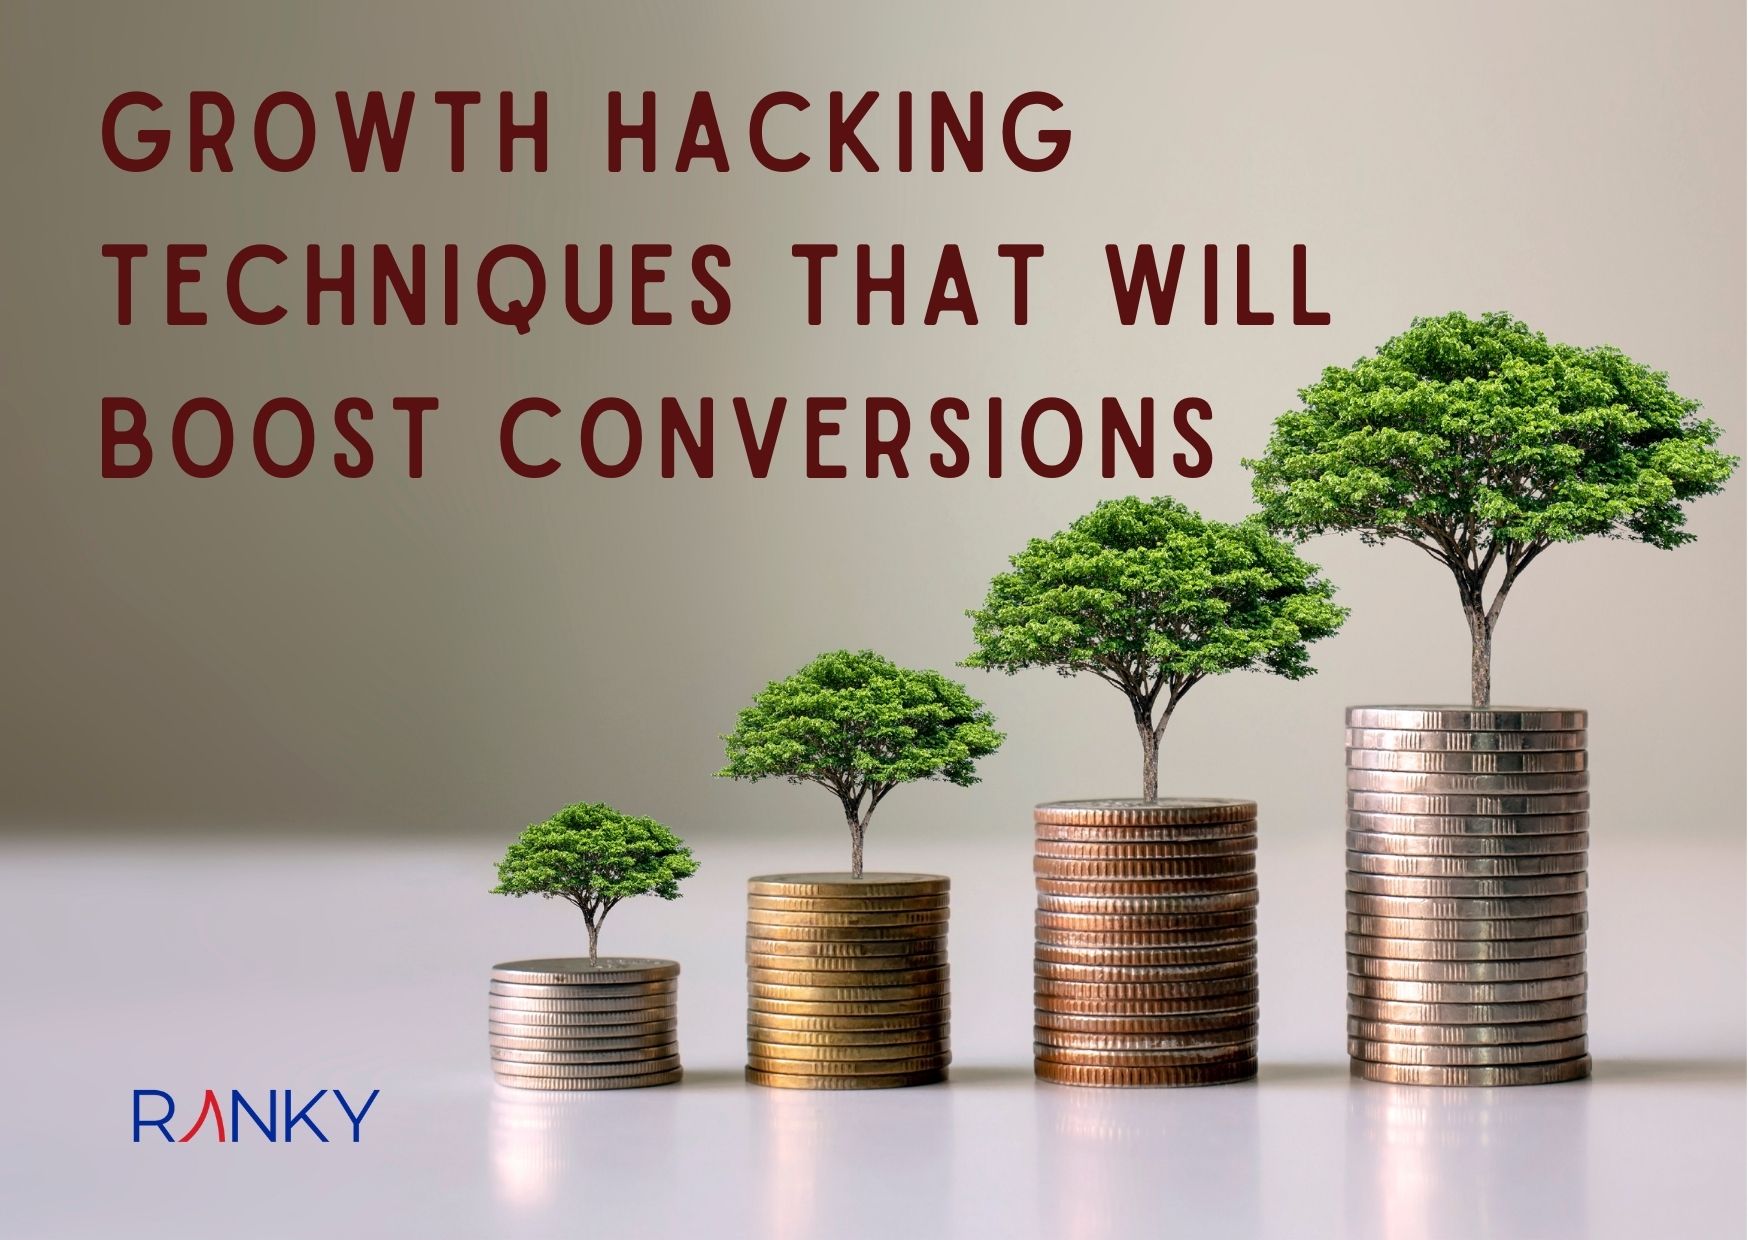 5 Growth Hacking Techniques that Will Boost Conversions